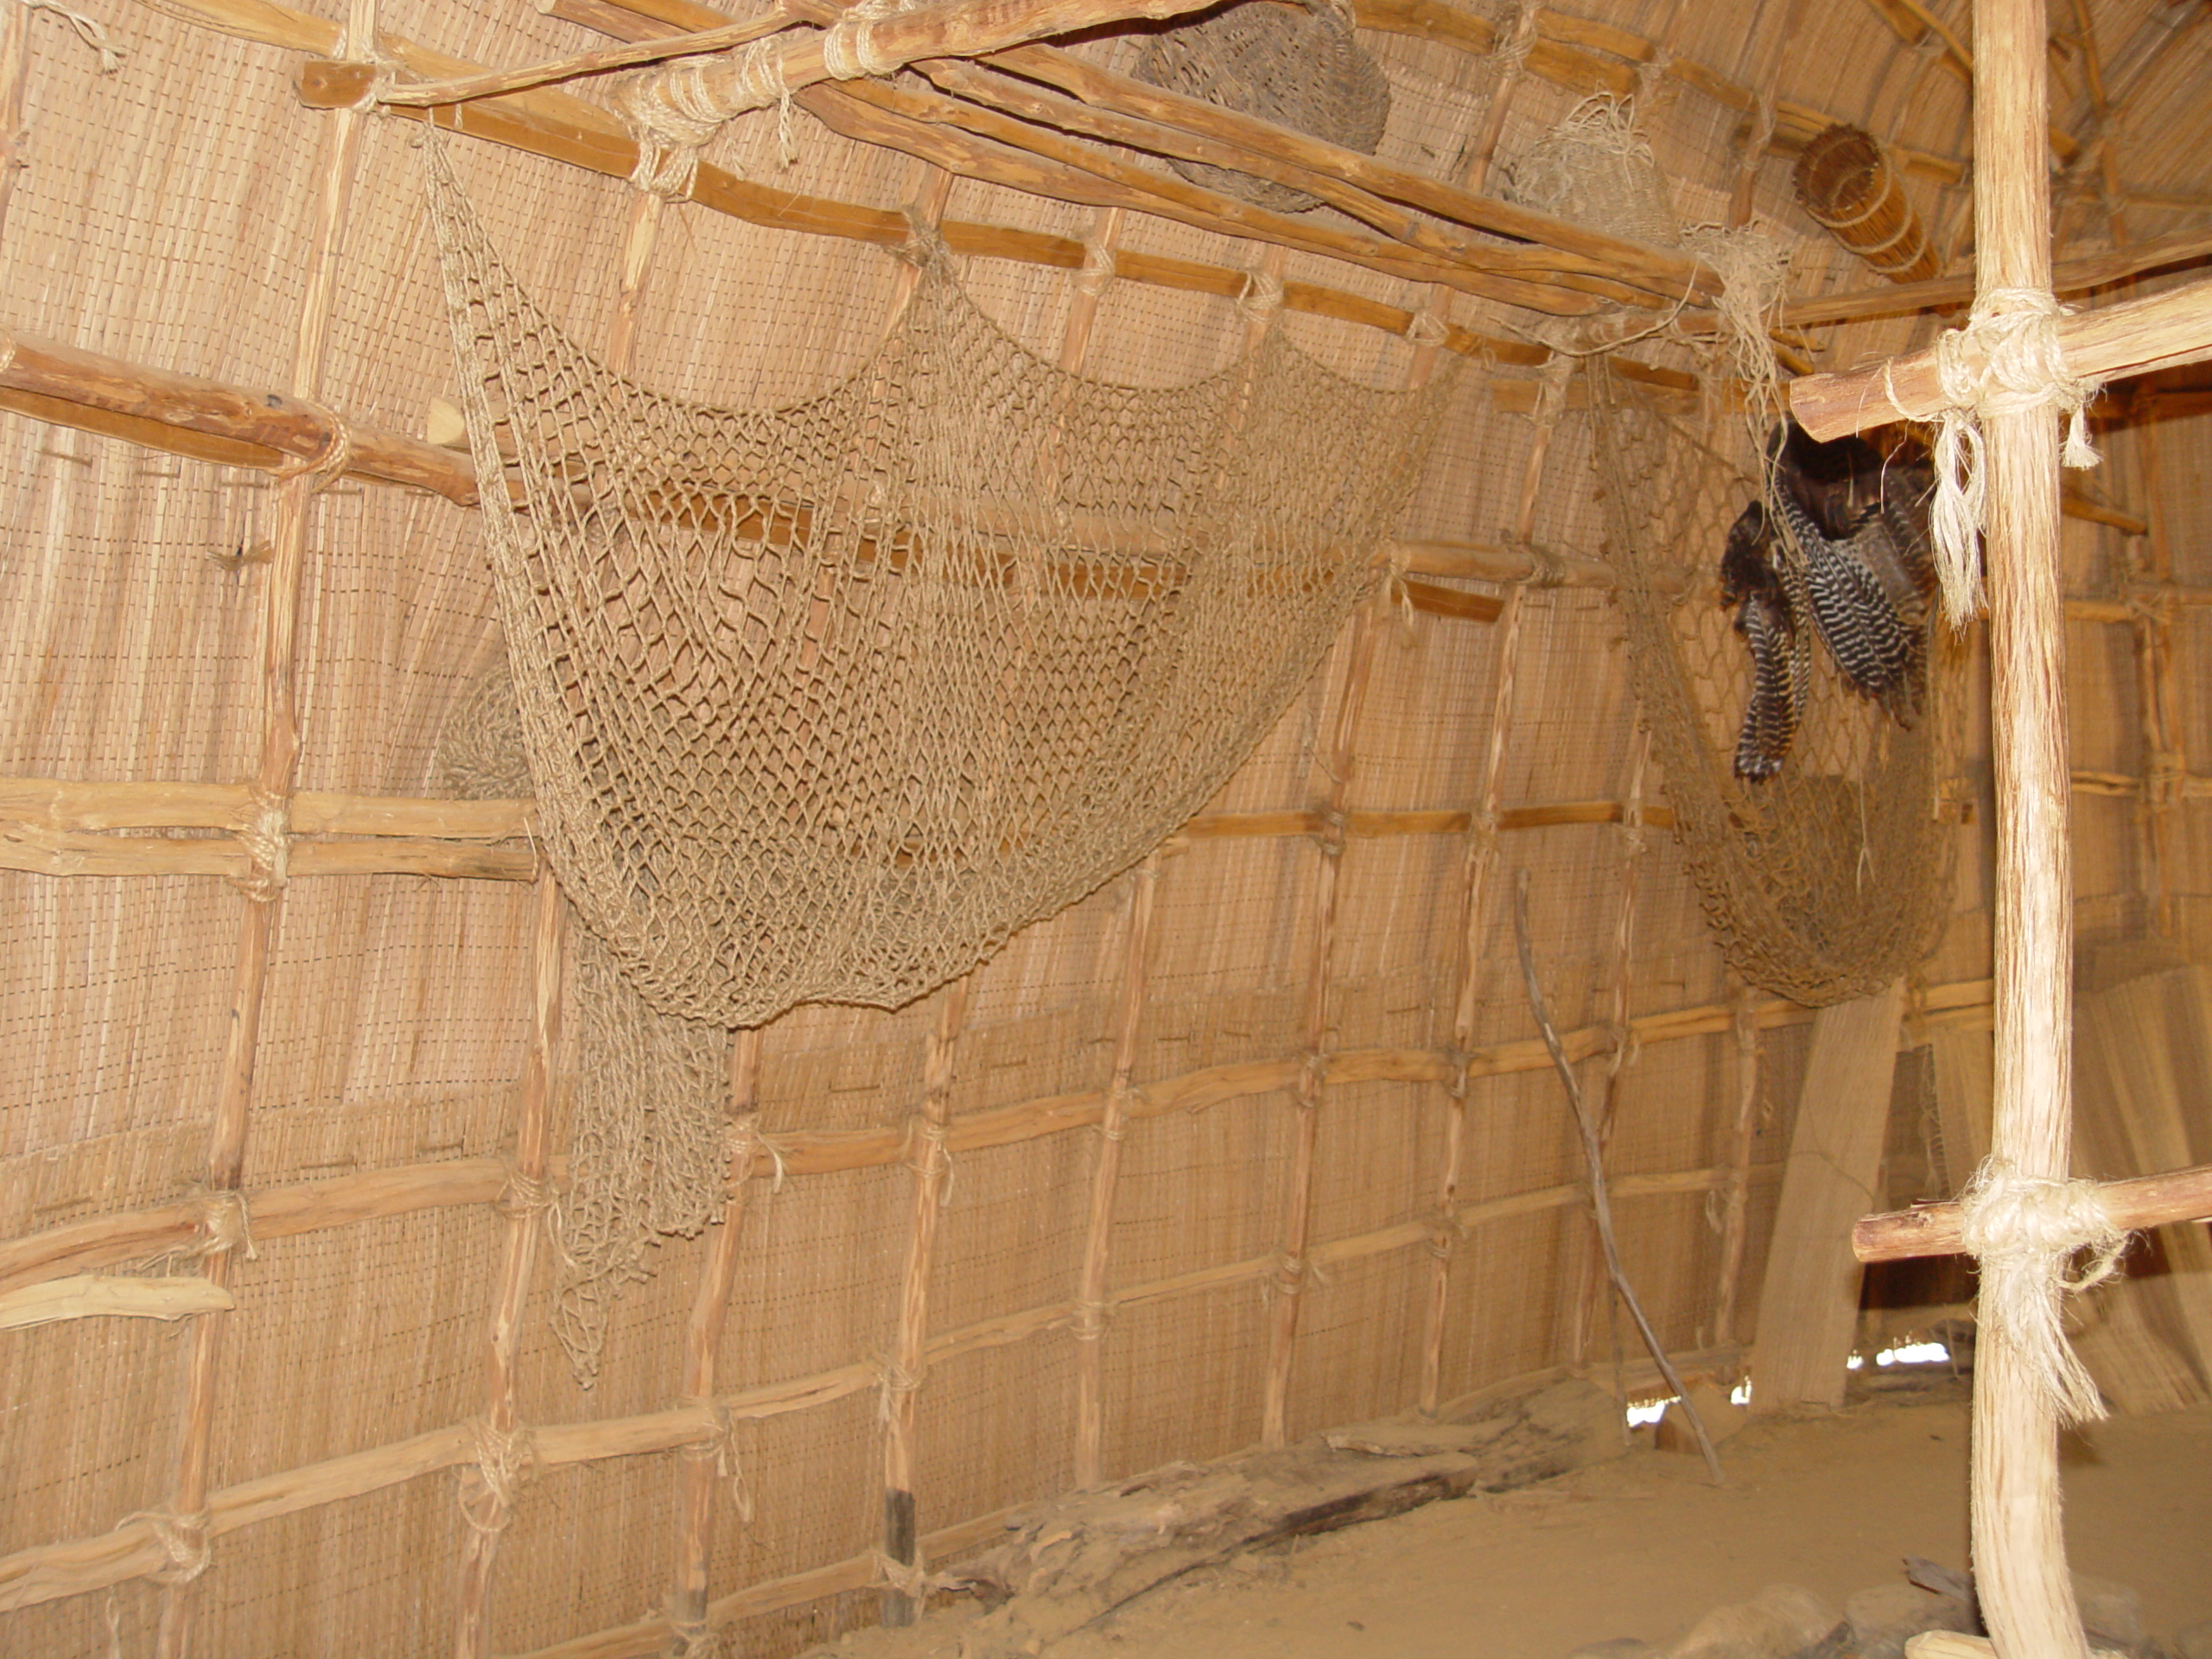 Inside the Native American home | Pics4Learning